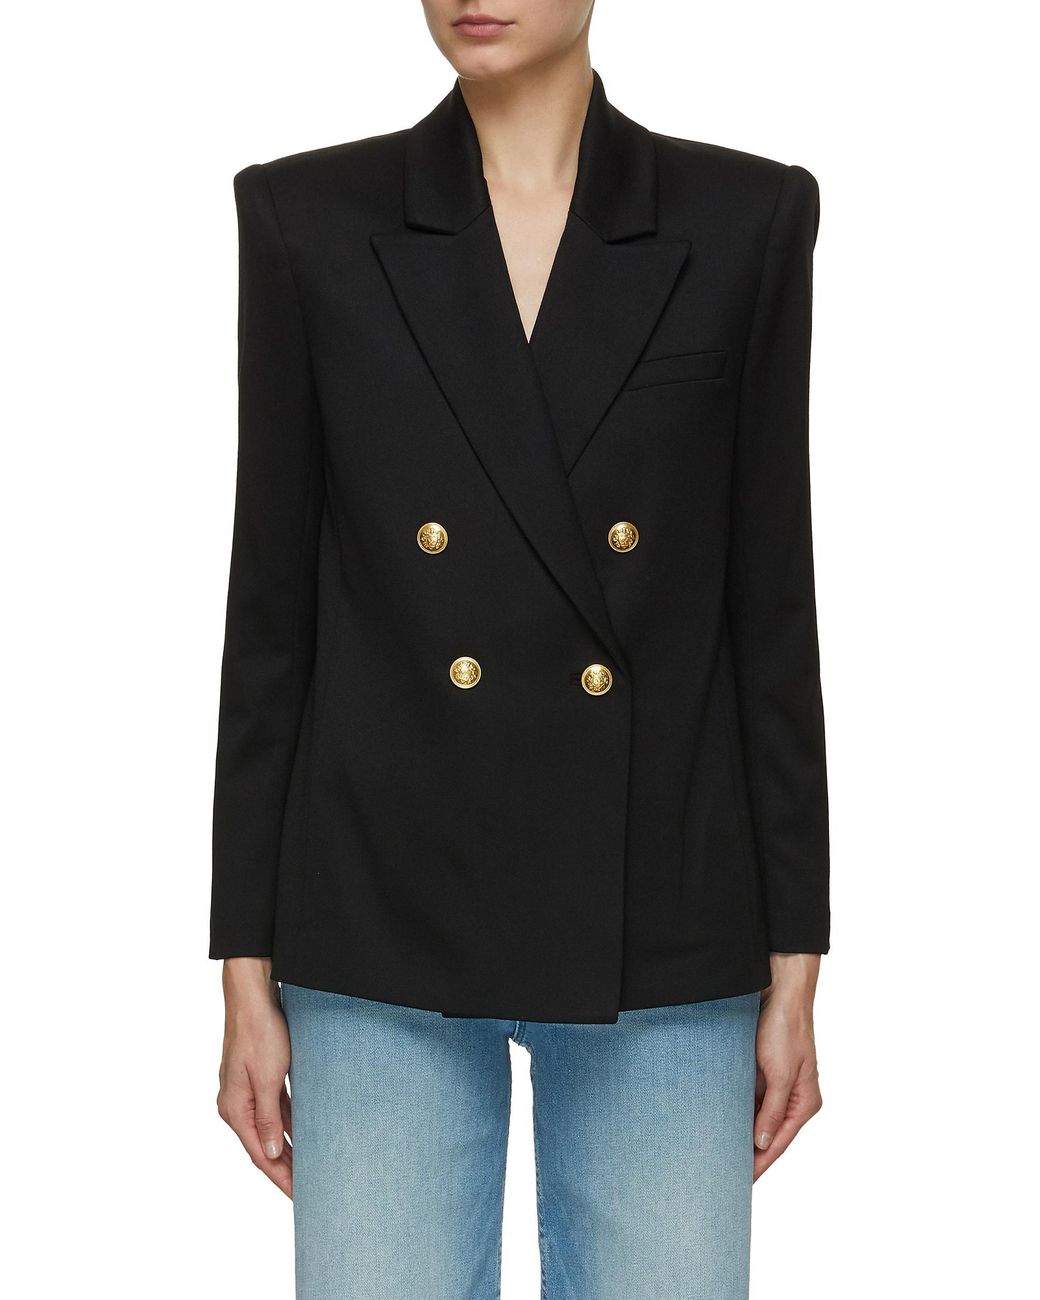 Alice + Olivia Anthony Double Breasted Blazer in Black | Lyst